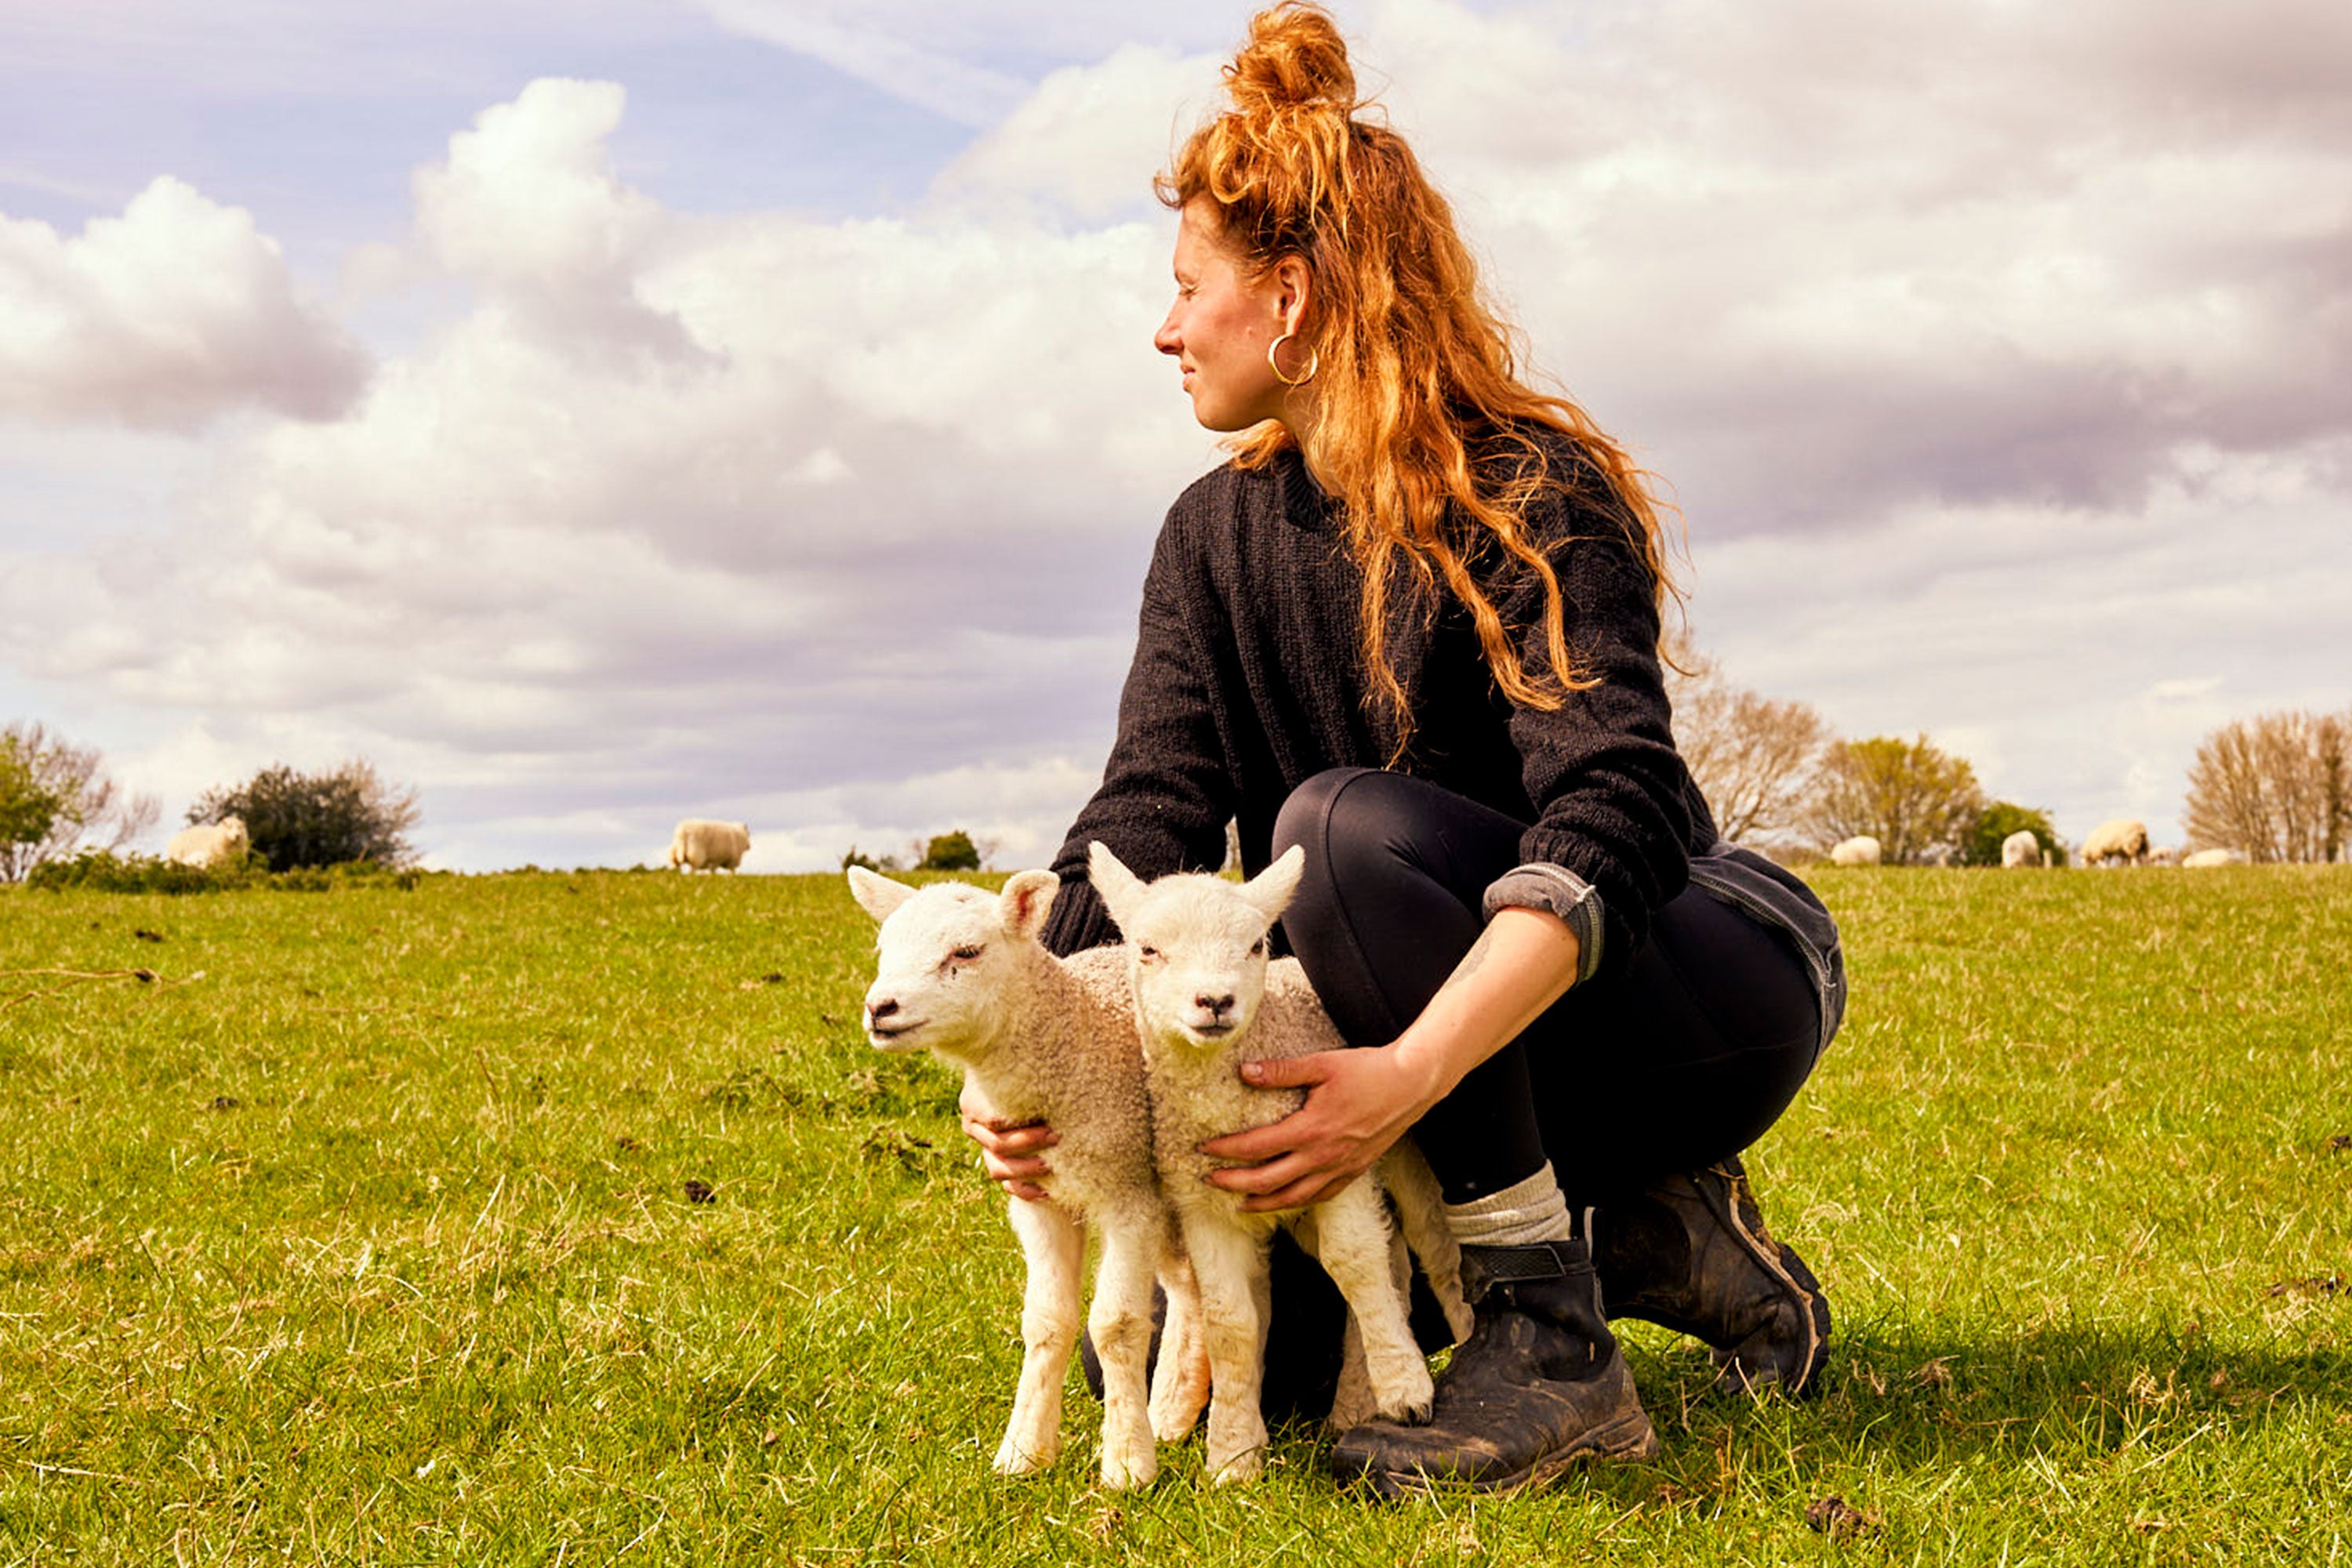 Zoe holding two lambs